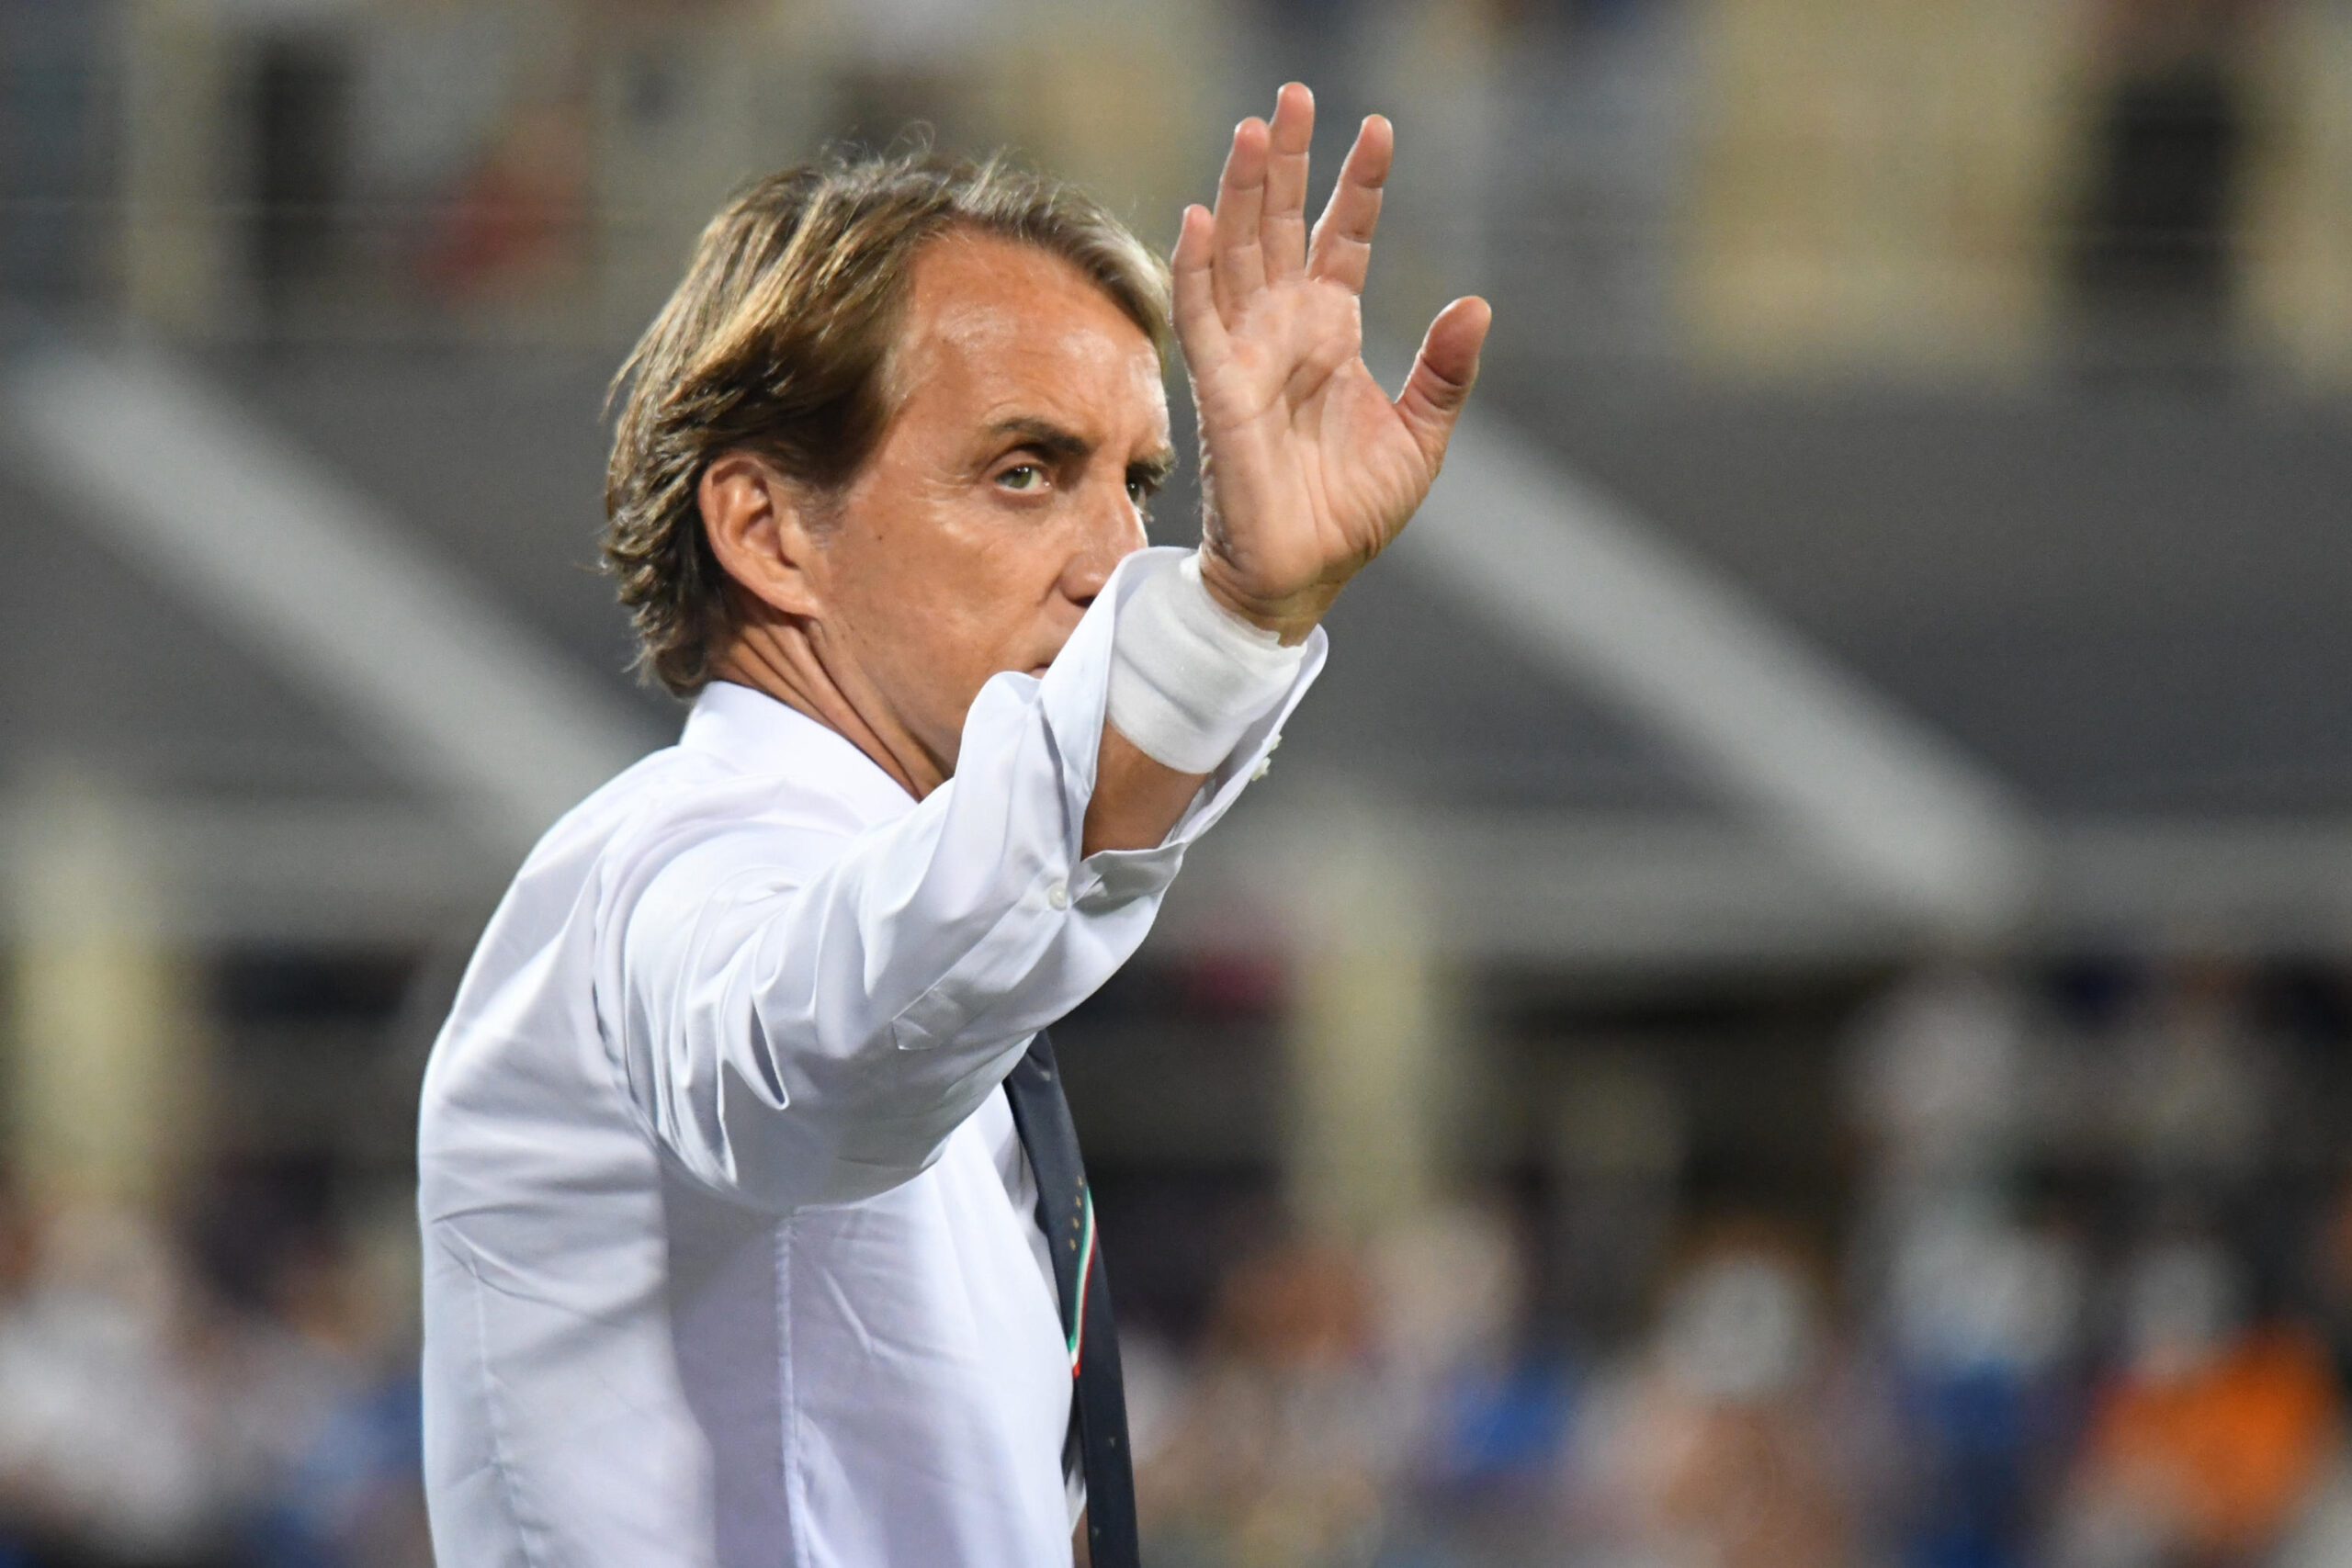 Italy's head coach Roberto Mancini during the European Qualifiers for World Cup  Qualifying round - Group C between Italy and Bulgaria at the Artemio Franchi stadium in Florence, Italy, 02 September 2021
ANSA/CLAUDIO GIOVANNINI